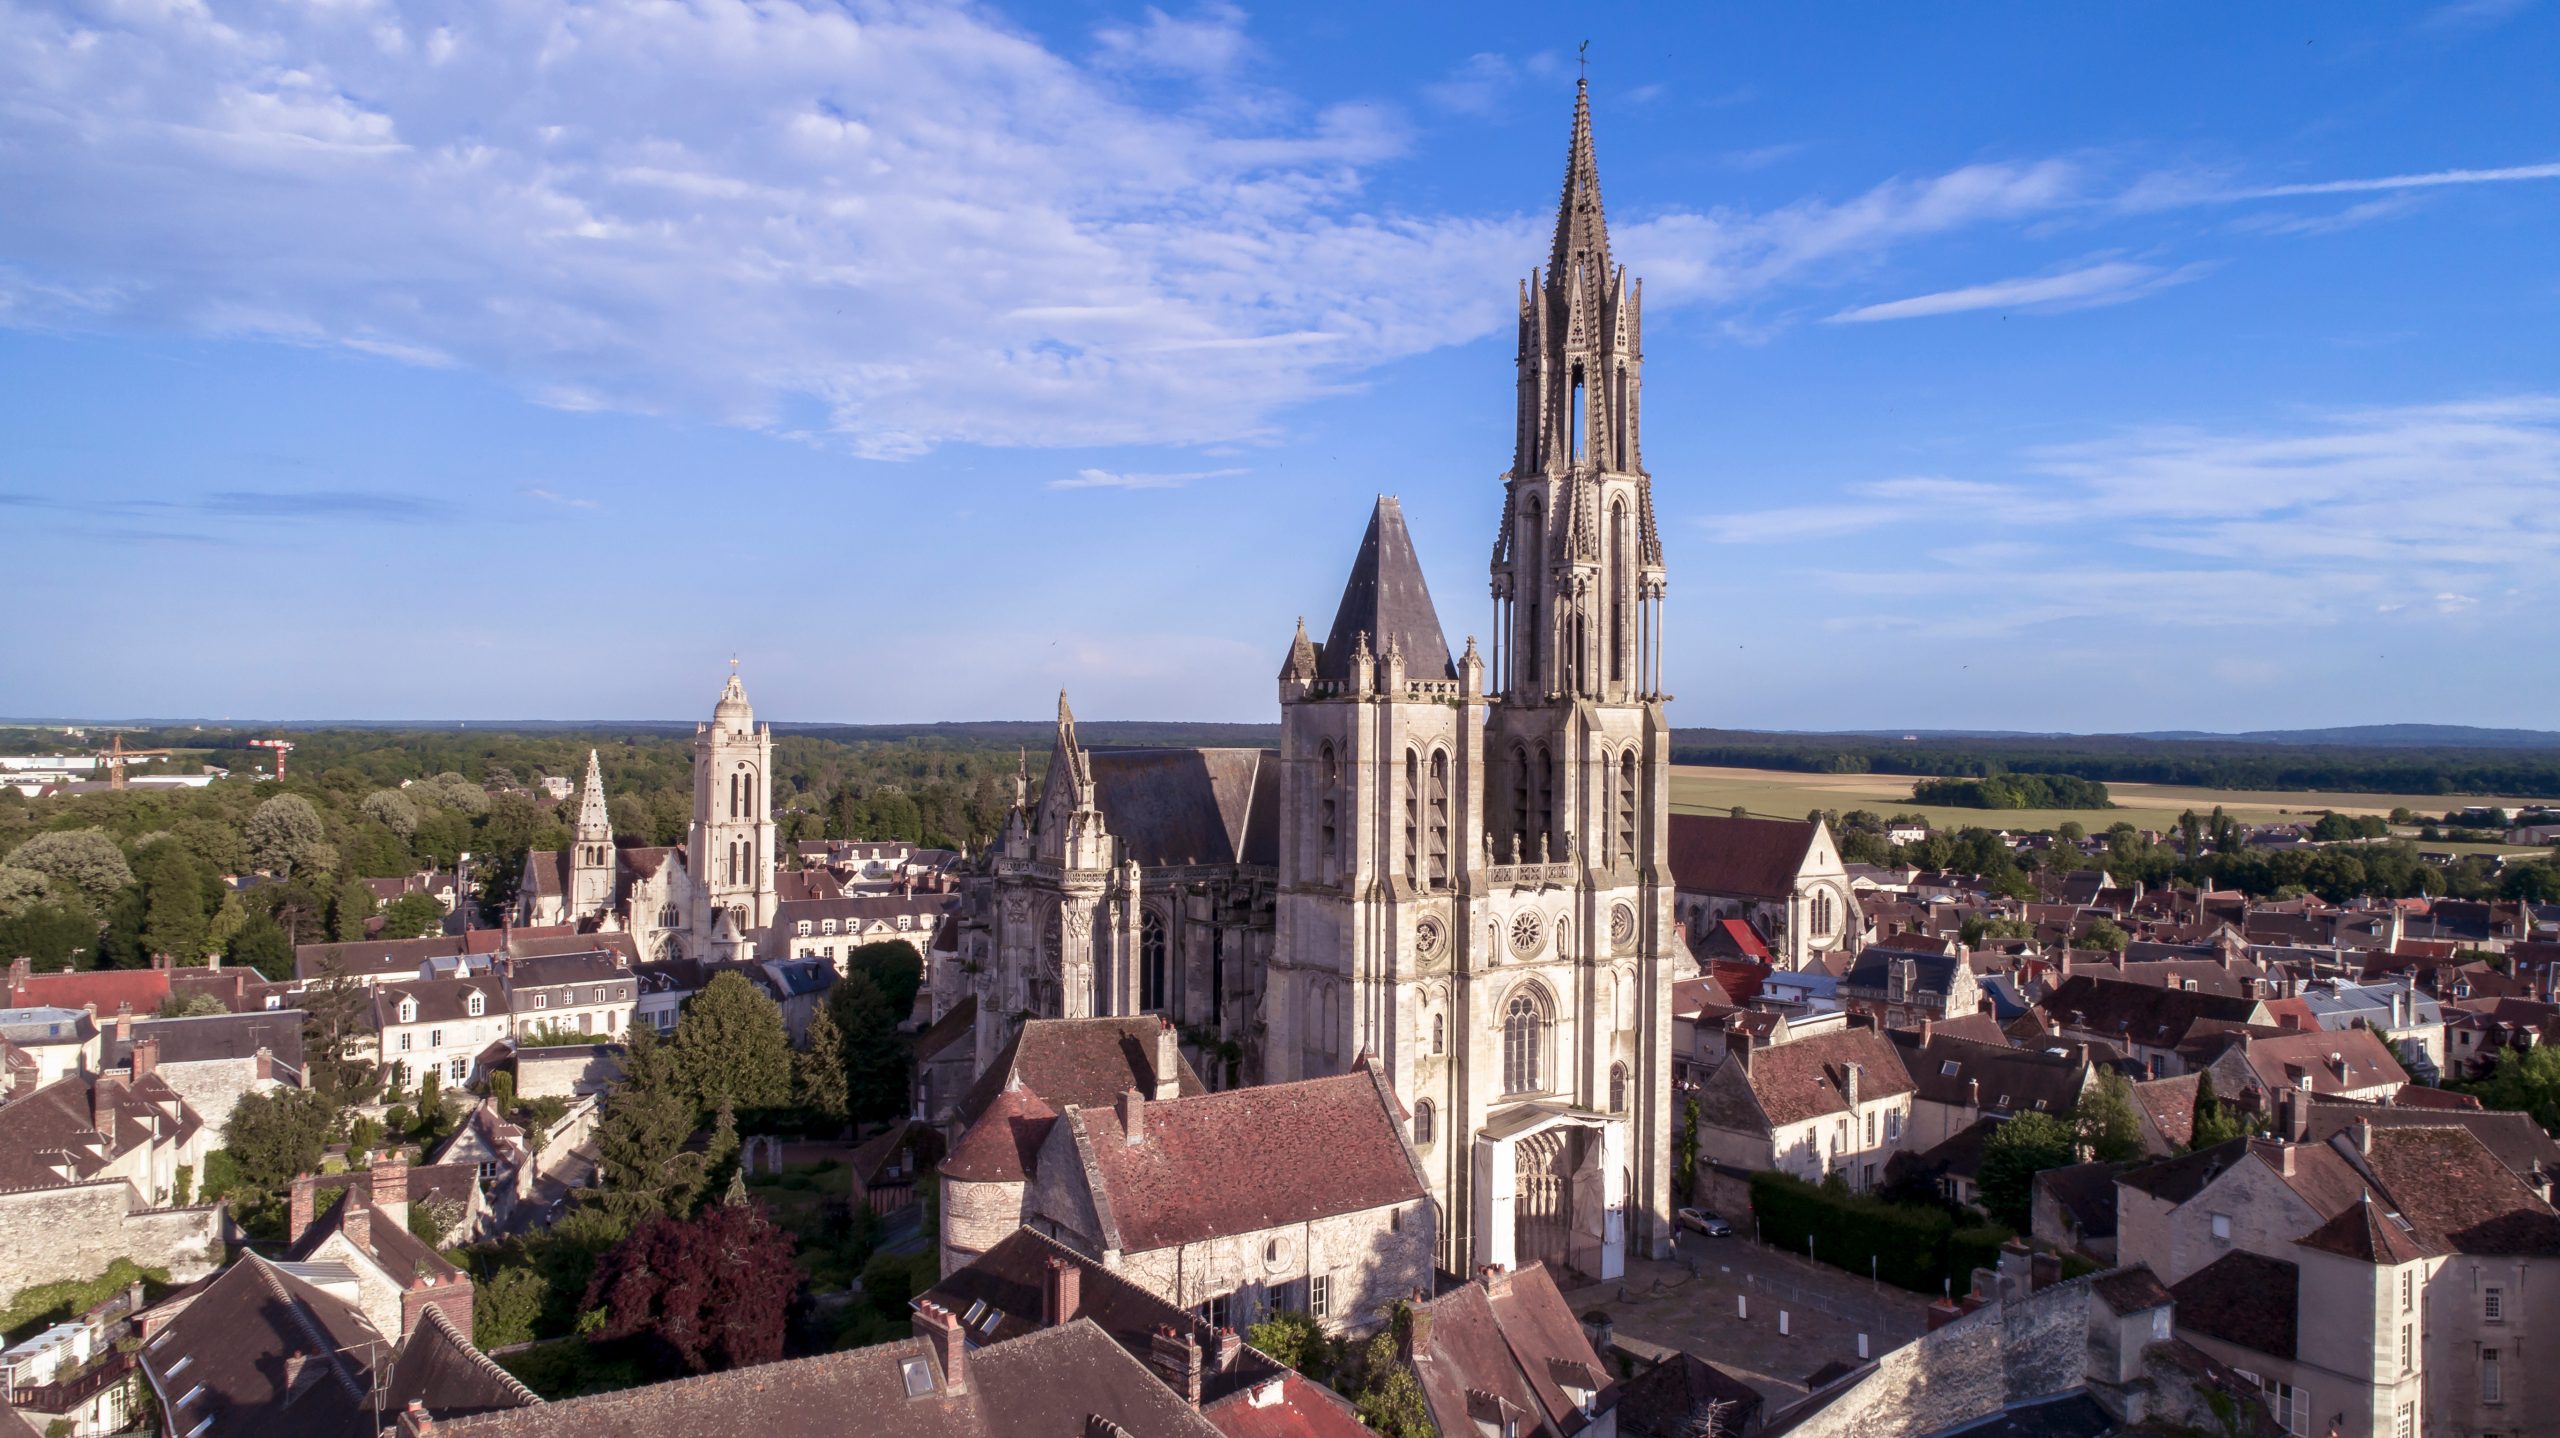 Close to Paris, visiting Senlis is one of the best day trips from Paris